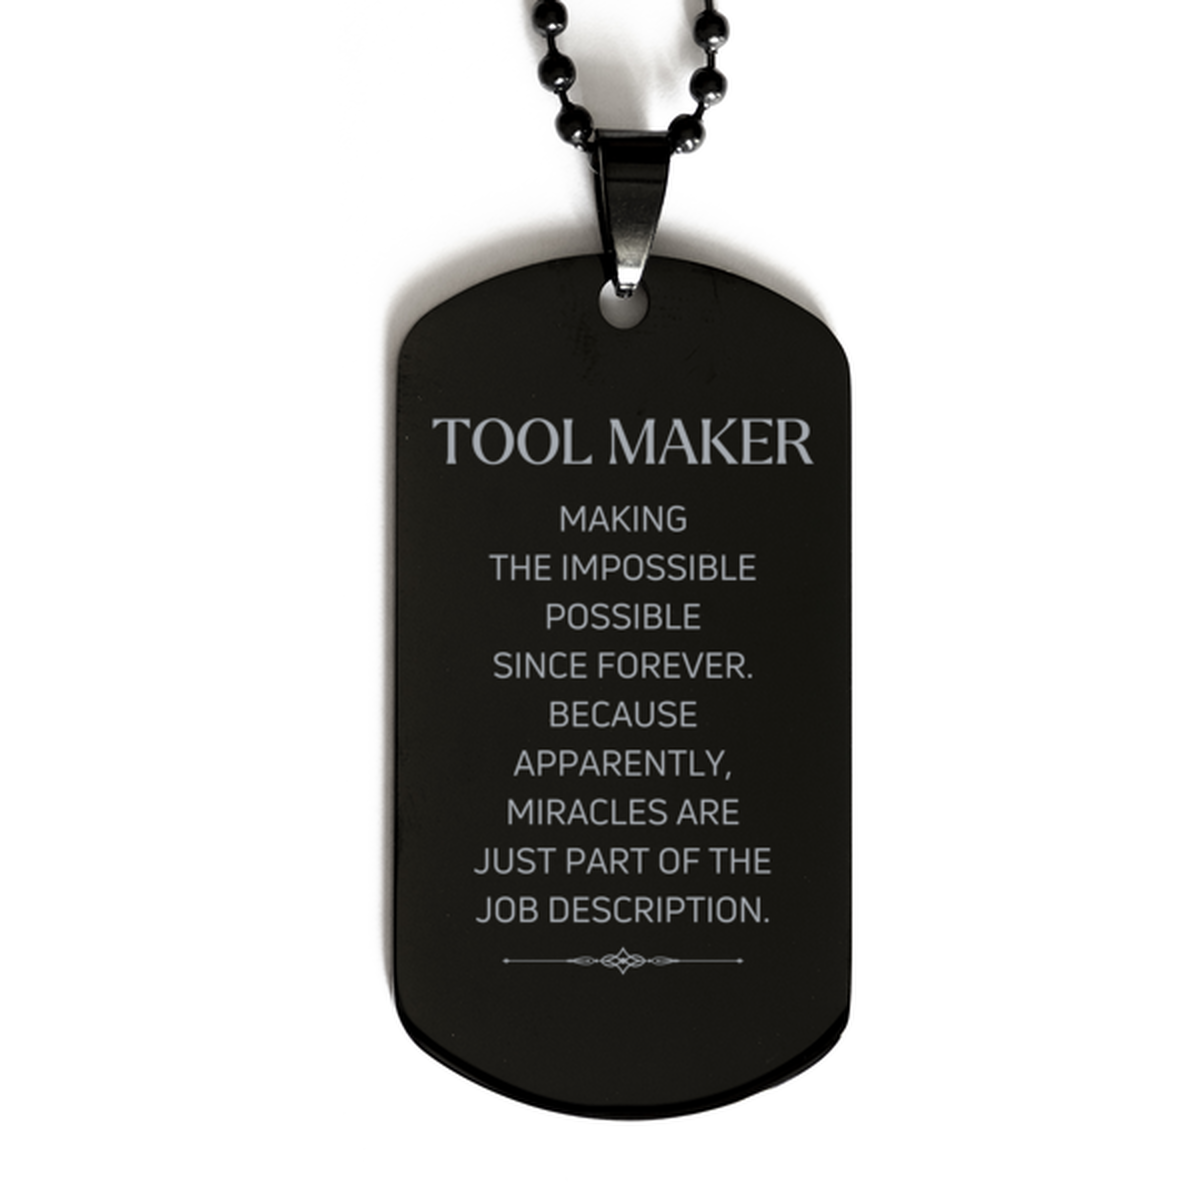 Funny Tool Maker Gifts, Miracles are just part of the job description, Inspirational Birthday Black Dog Tag For Tool Maker, Men, Women, Coworkers, Friends, Boss